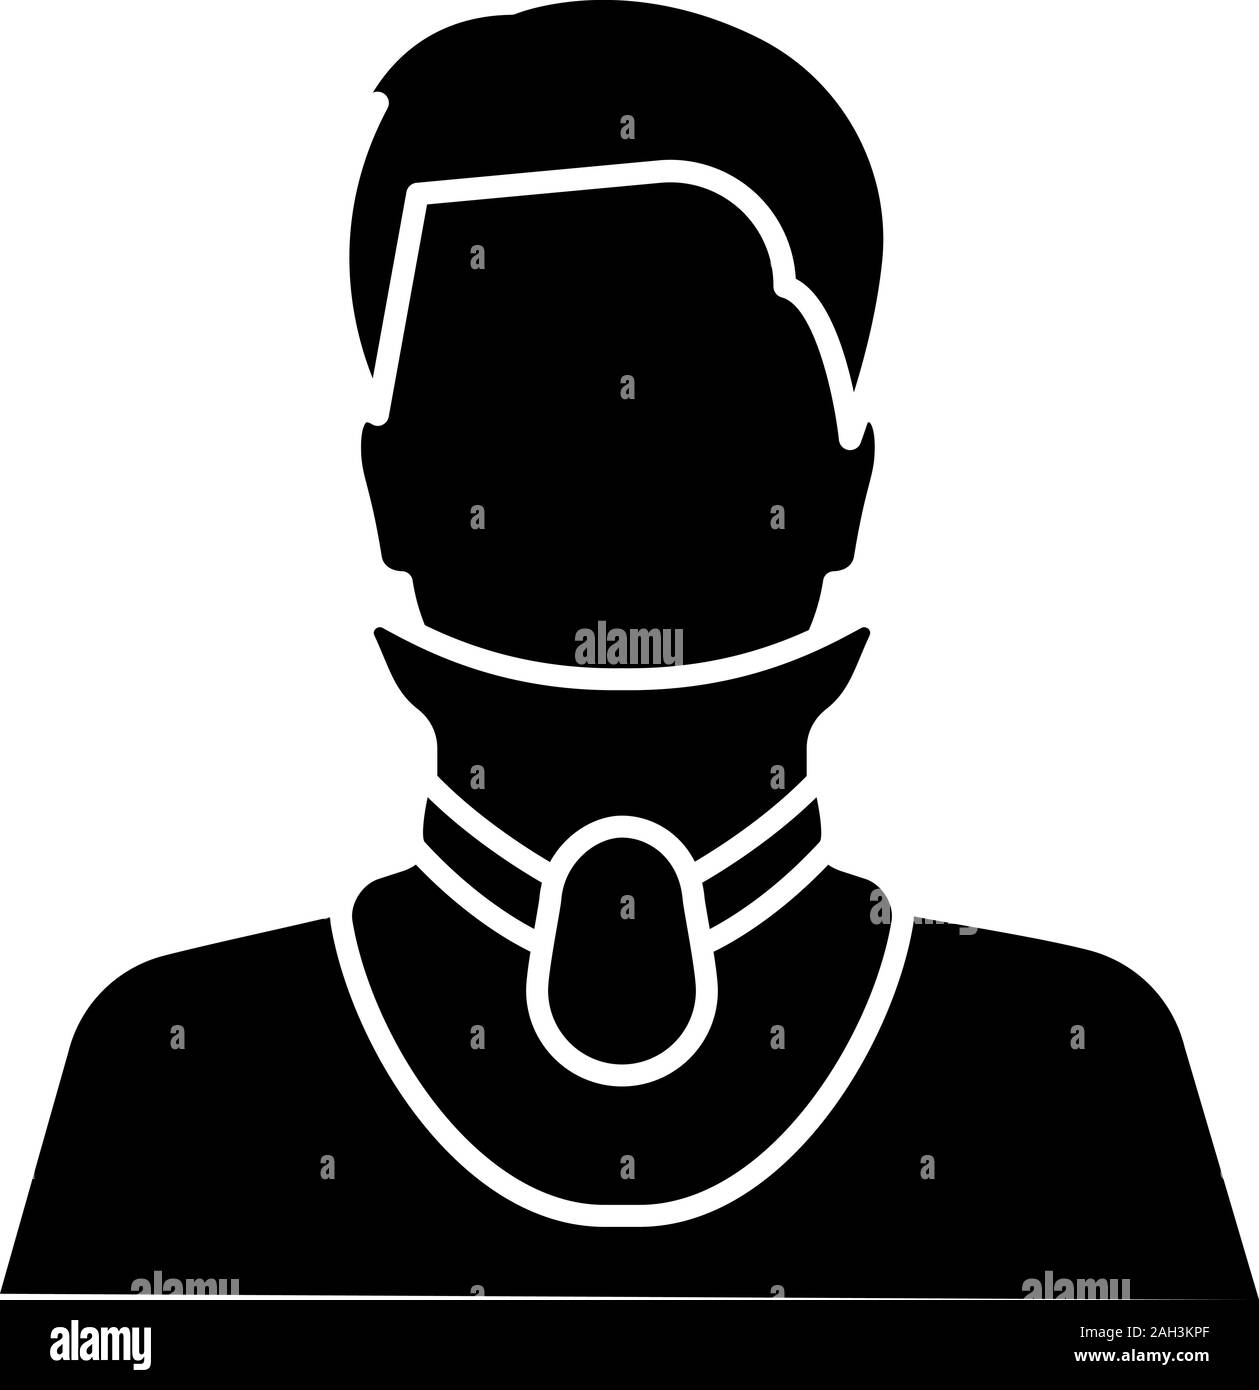 Cervical collar glyph icon. Silhouette symbol. Neck brace. Medical foam neck support. Negative space. Orthopedic collar. Traumatic head and neck injur Stock Vector